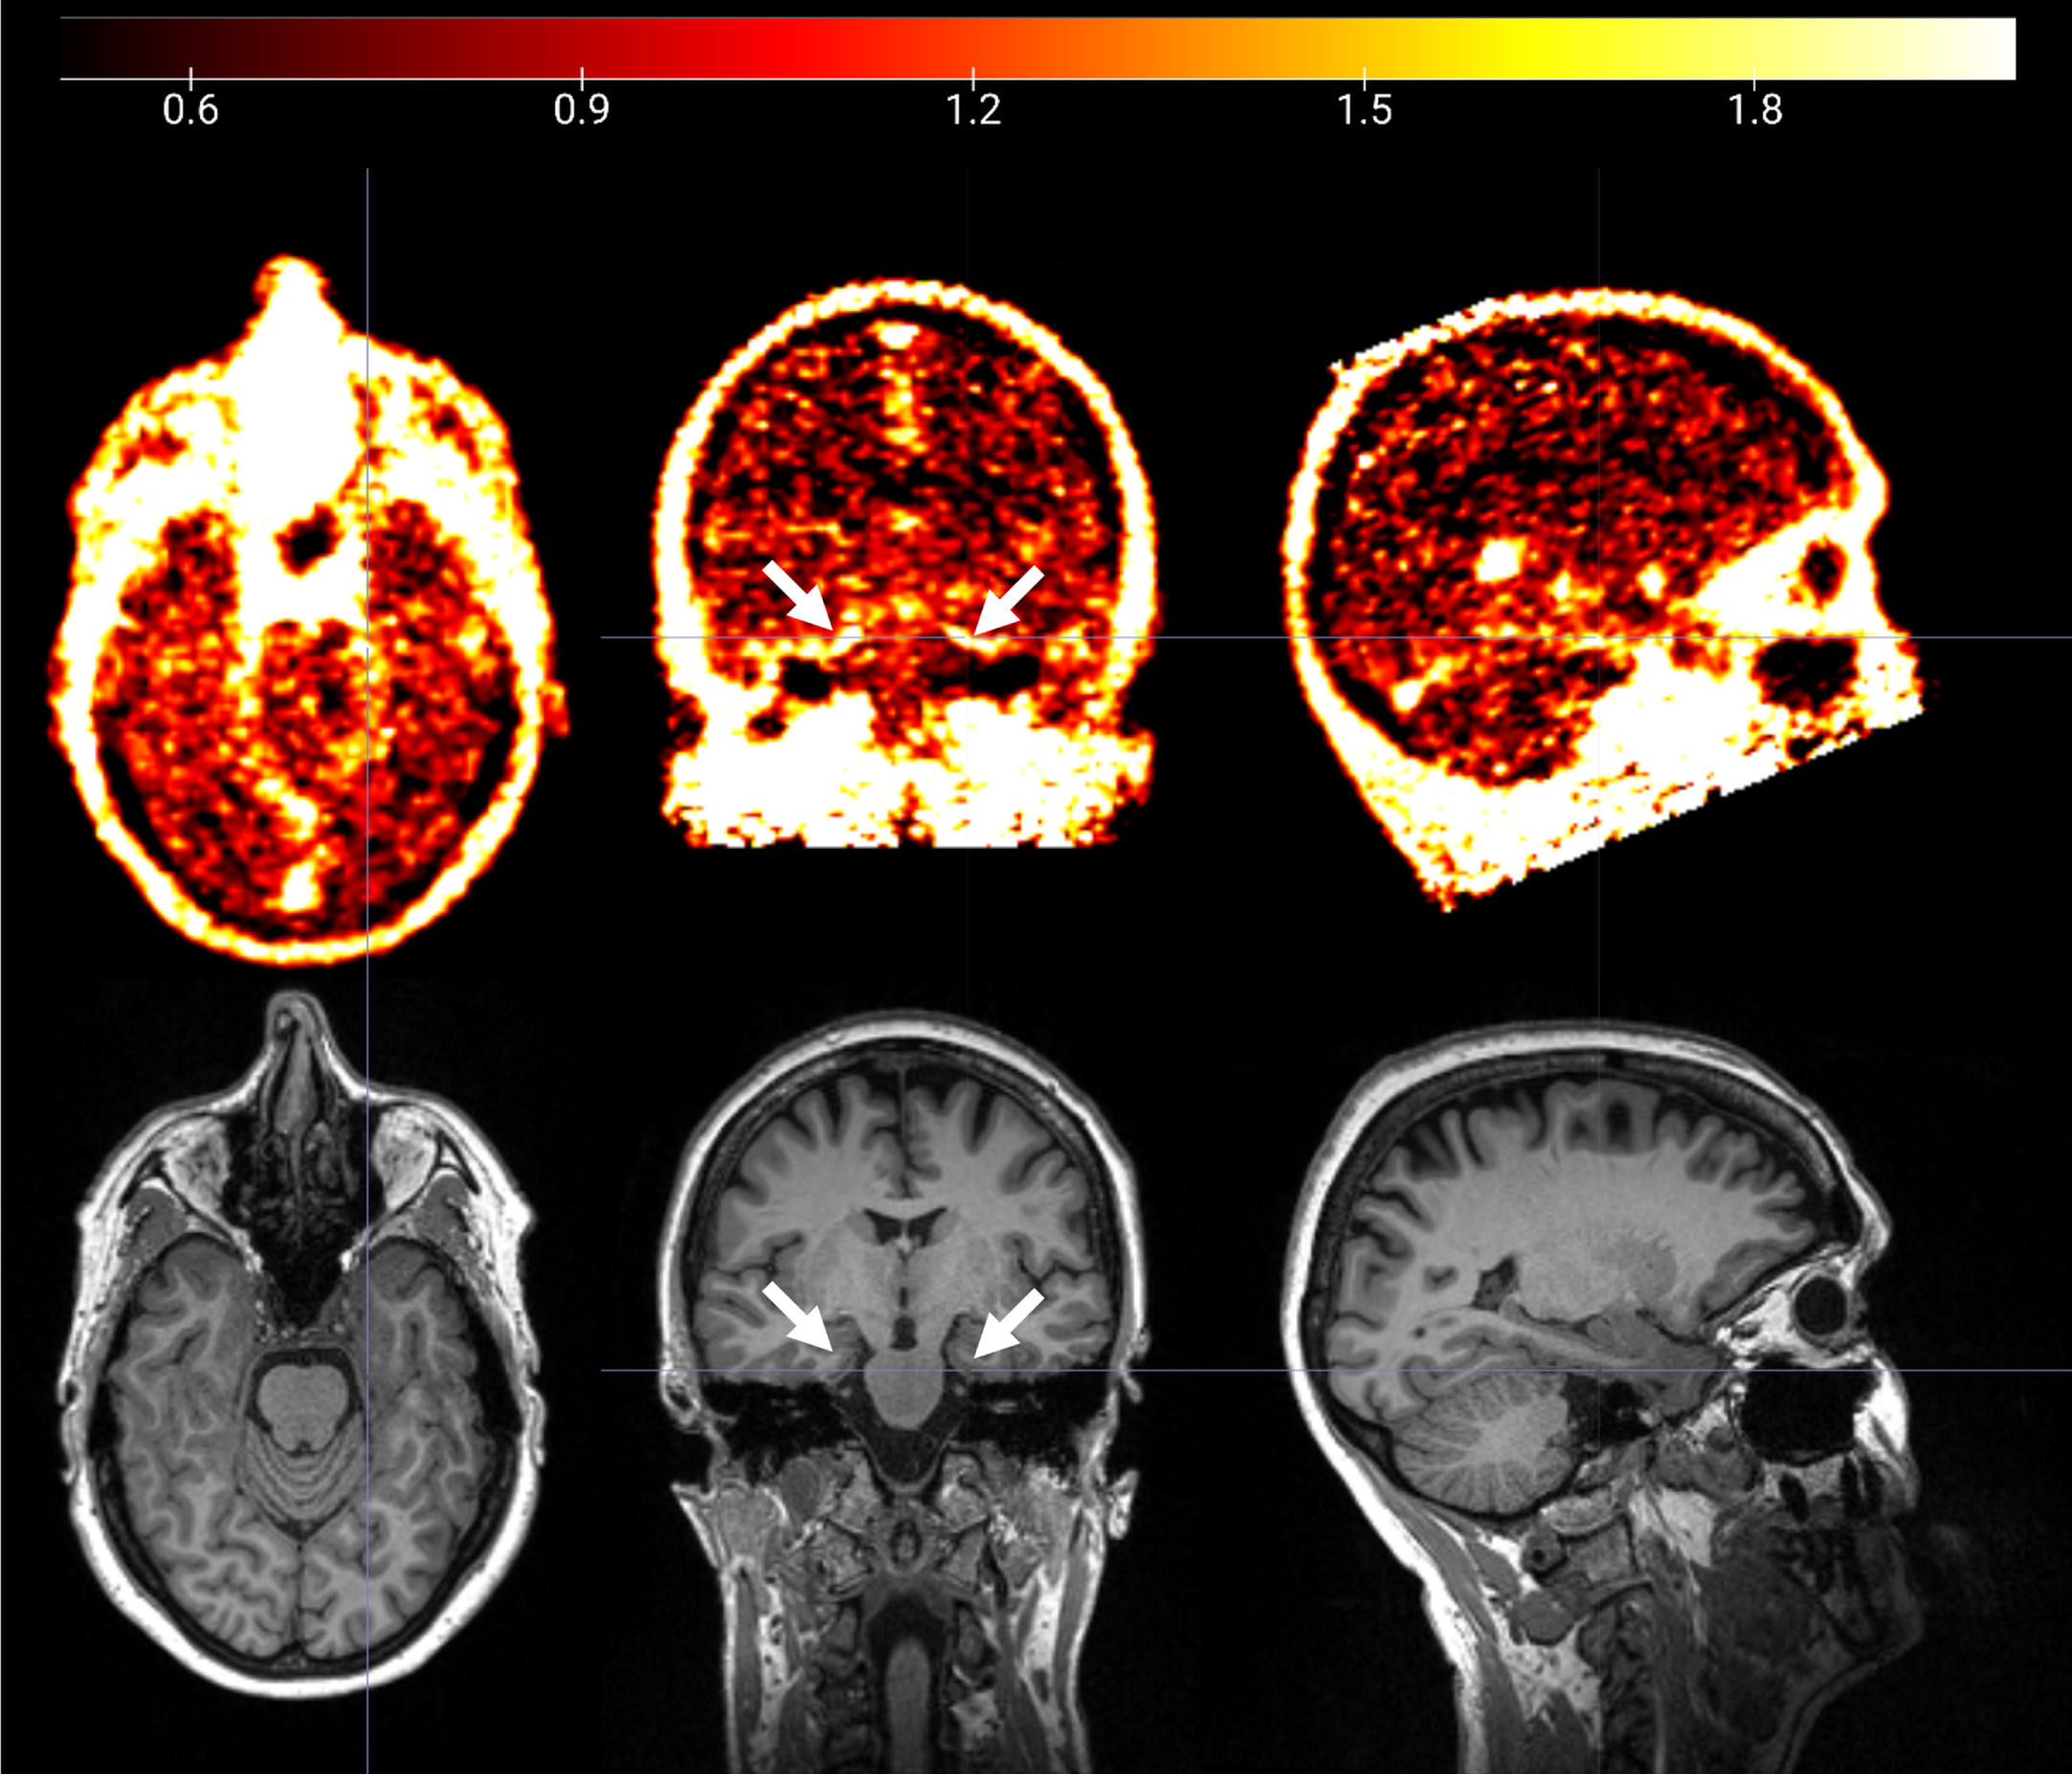 18F-GE180 PET SUVR image (upper panel) and T1 structural MRI image (lower panel) from a cognitively impaired participant. Elevated 18F-GE180 uptake following the contour of entorhinal cortex and parahippocampal gyrus (pointed by white arrows) was observed.